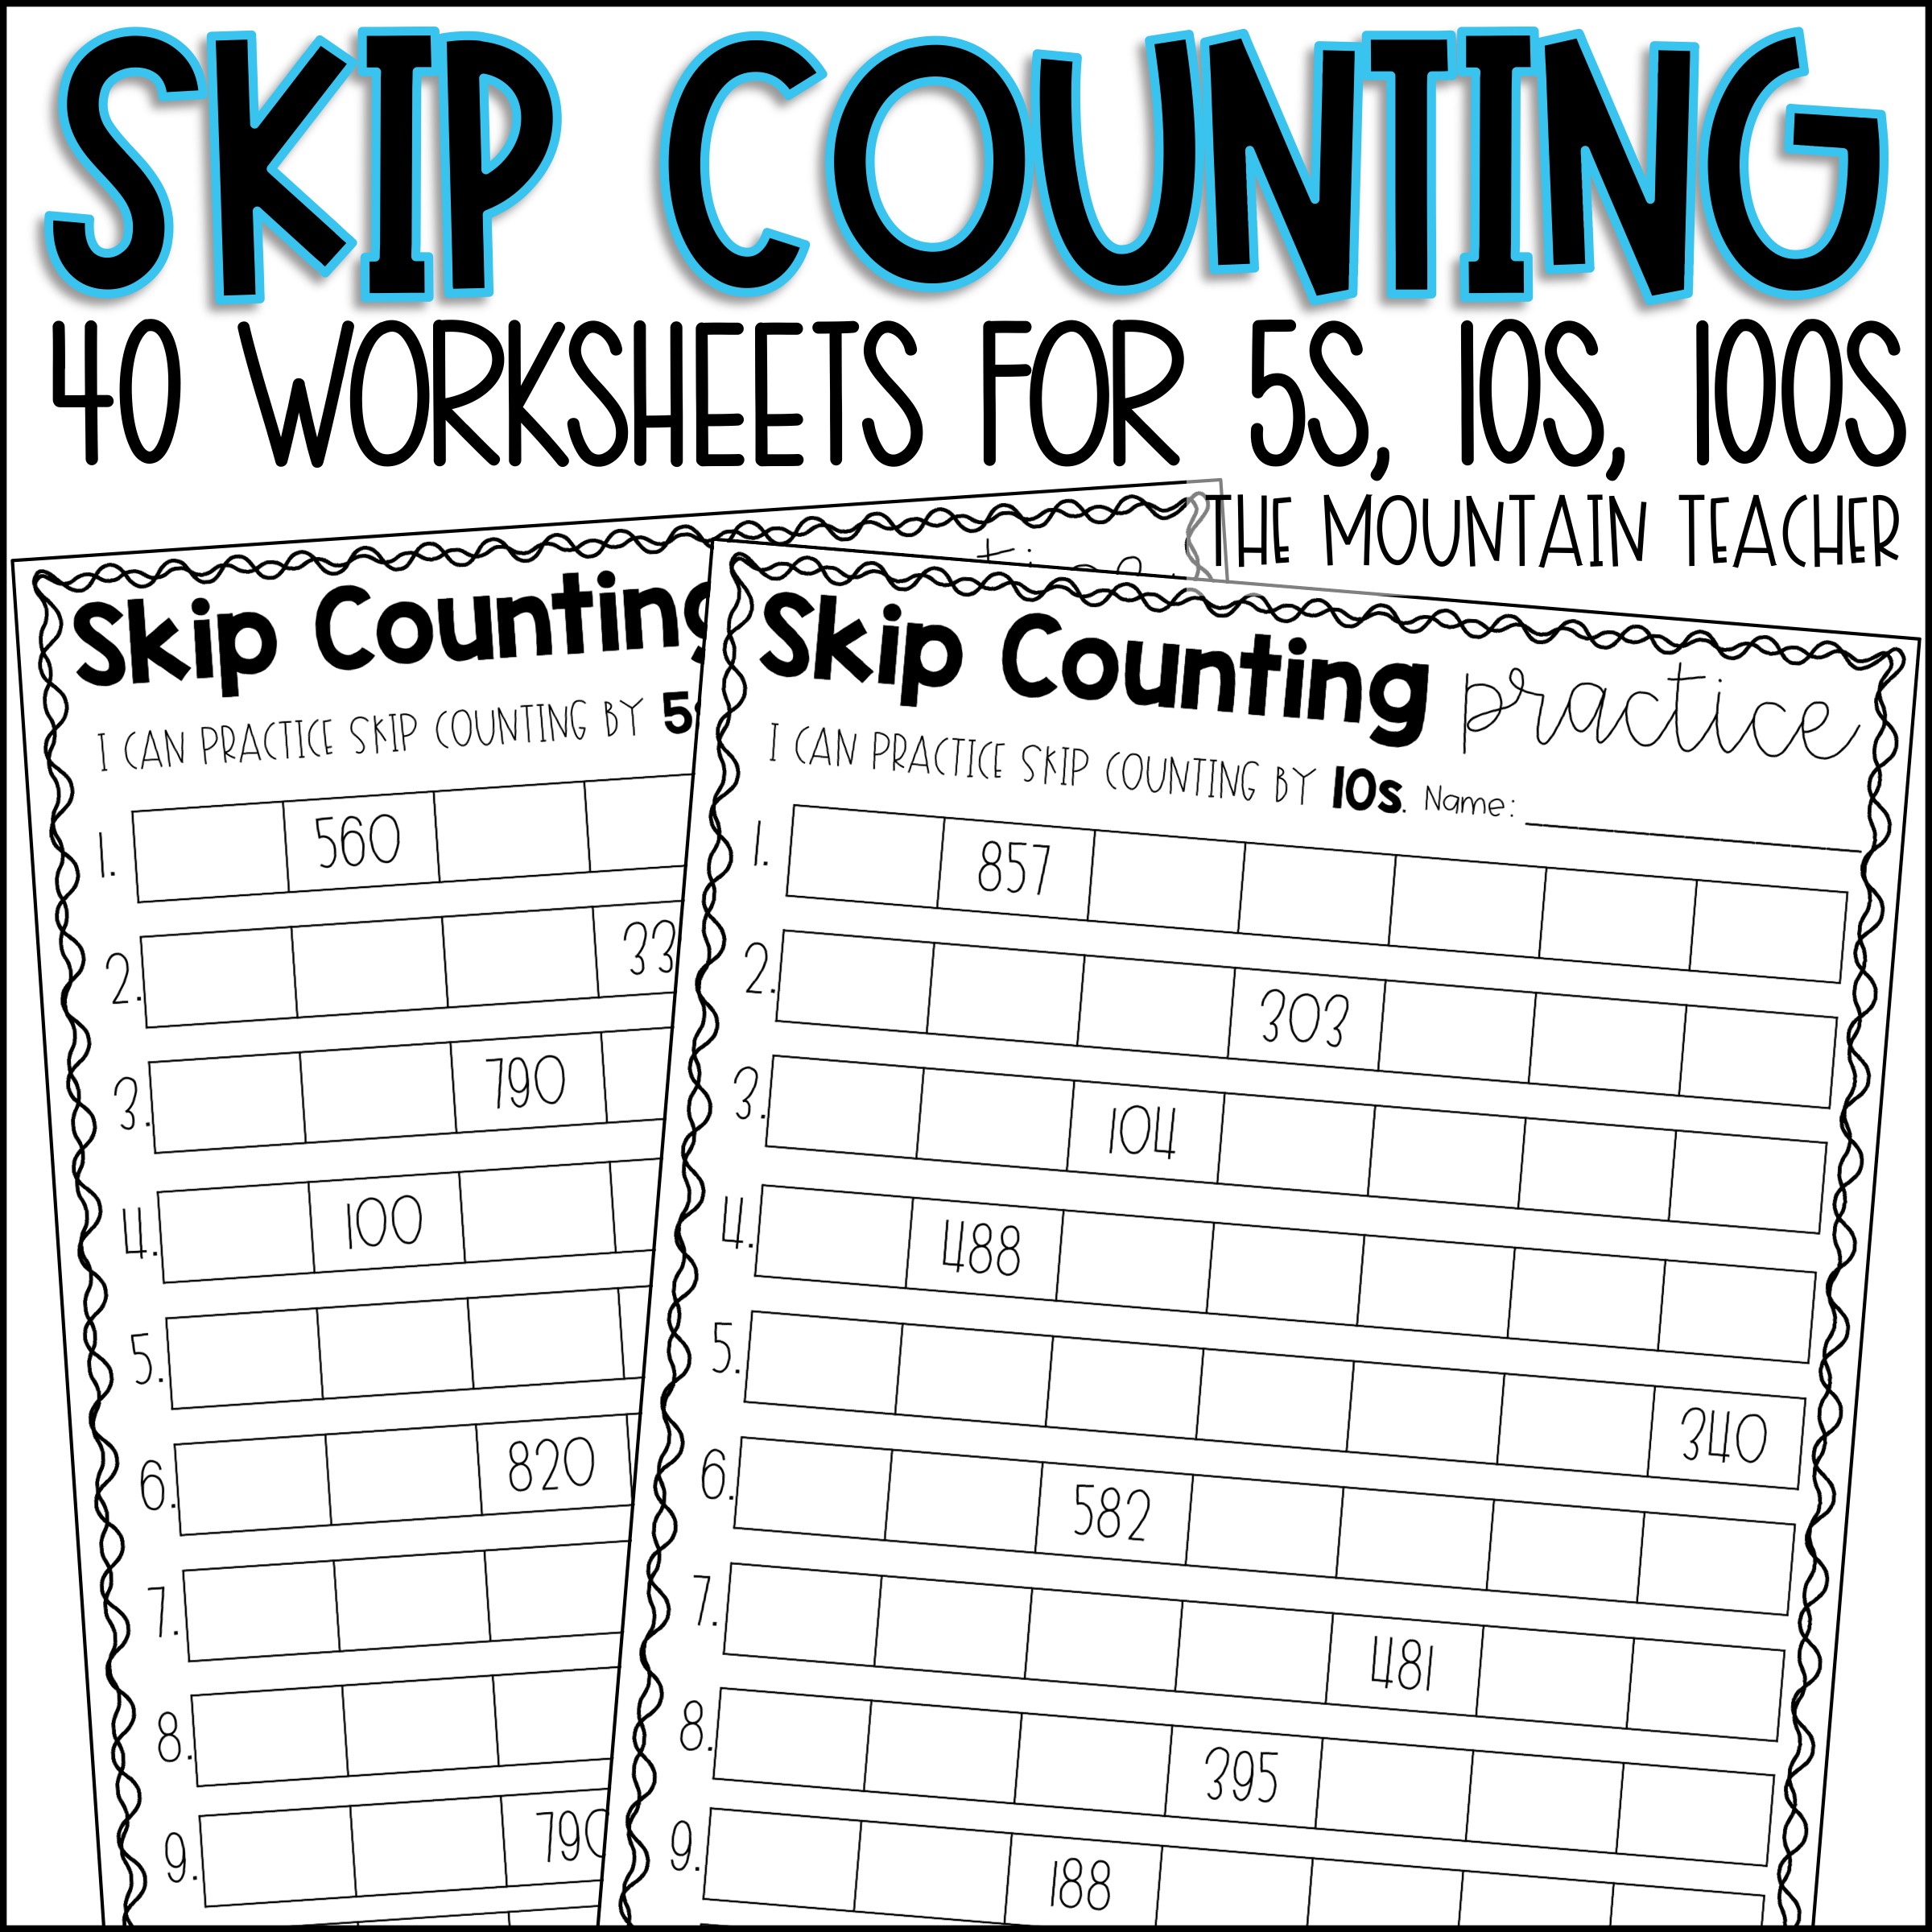 skip-counting-worksheets-by-5s-by-10s-and-by-100s-classful